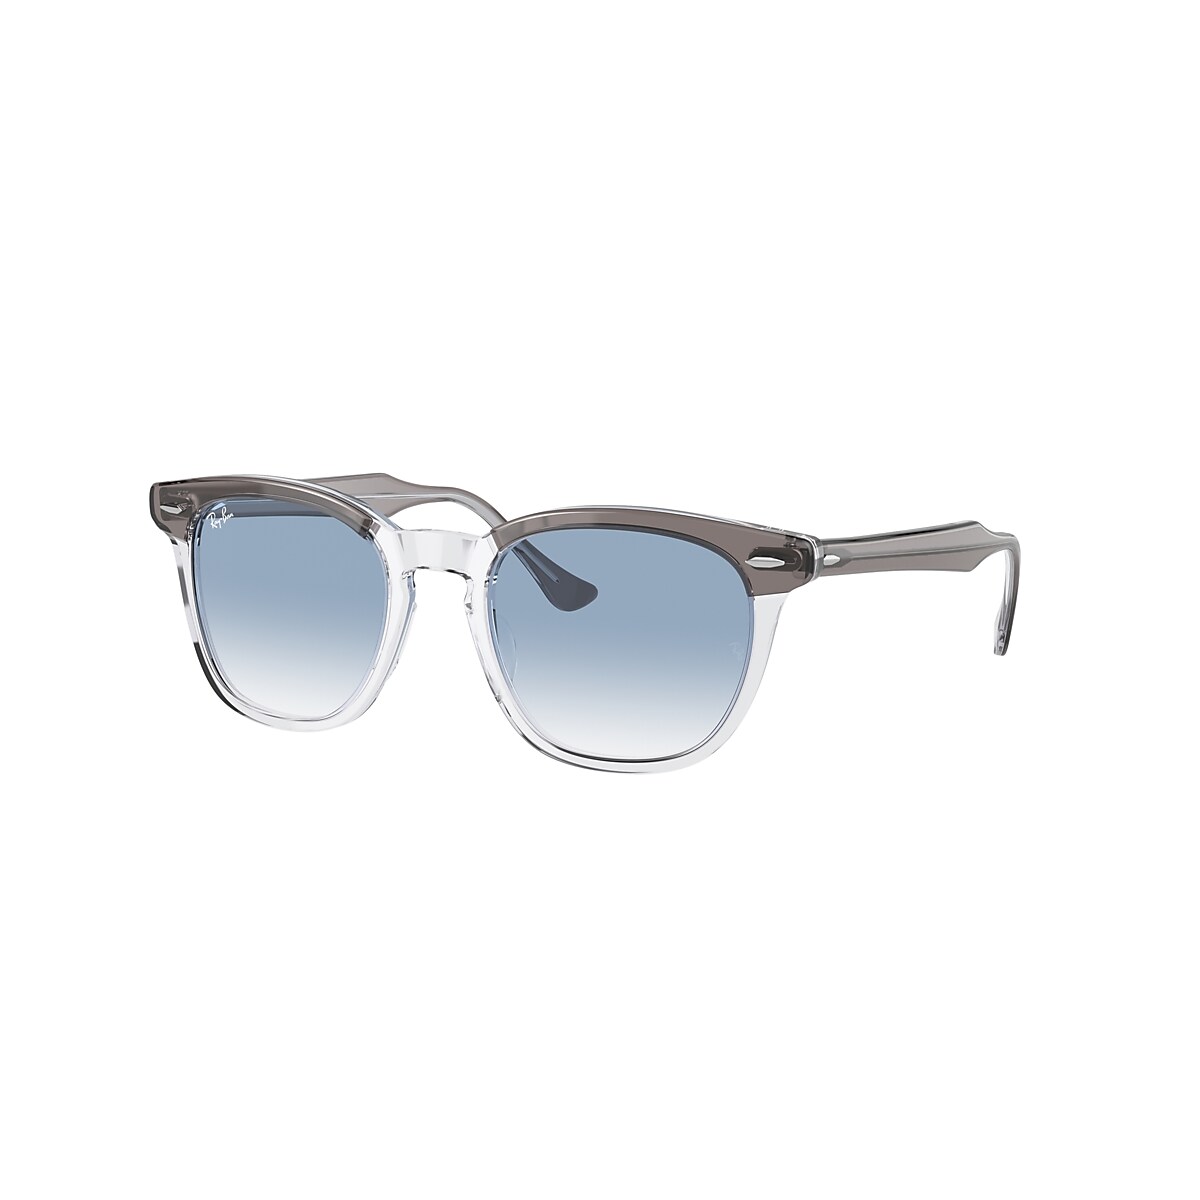 HAWKEYE Sunglasses in Grey On Transparent and Blue - Ray-Ban